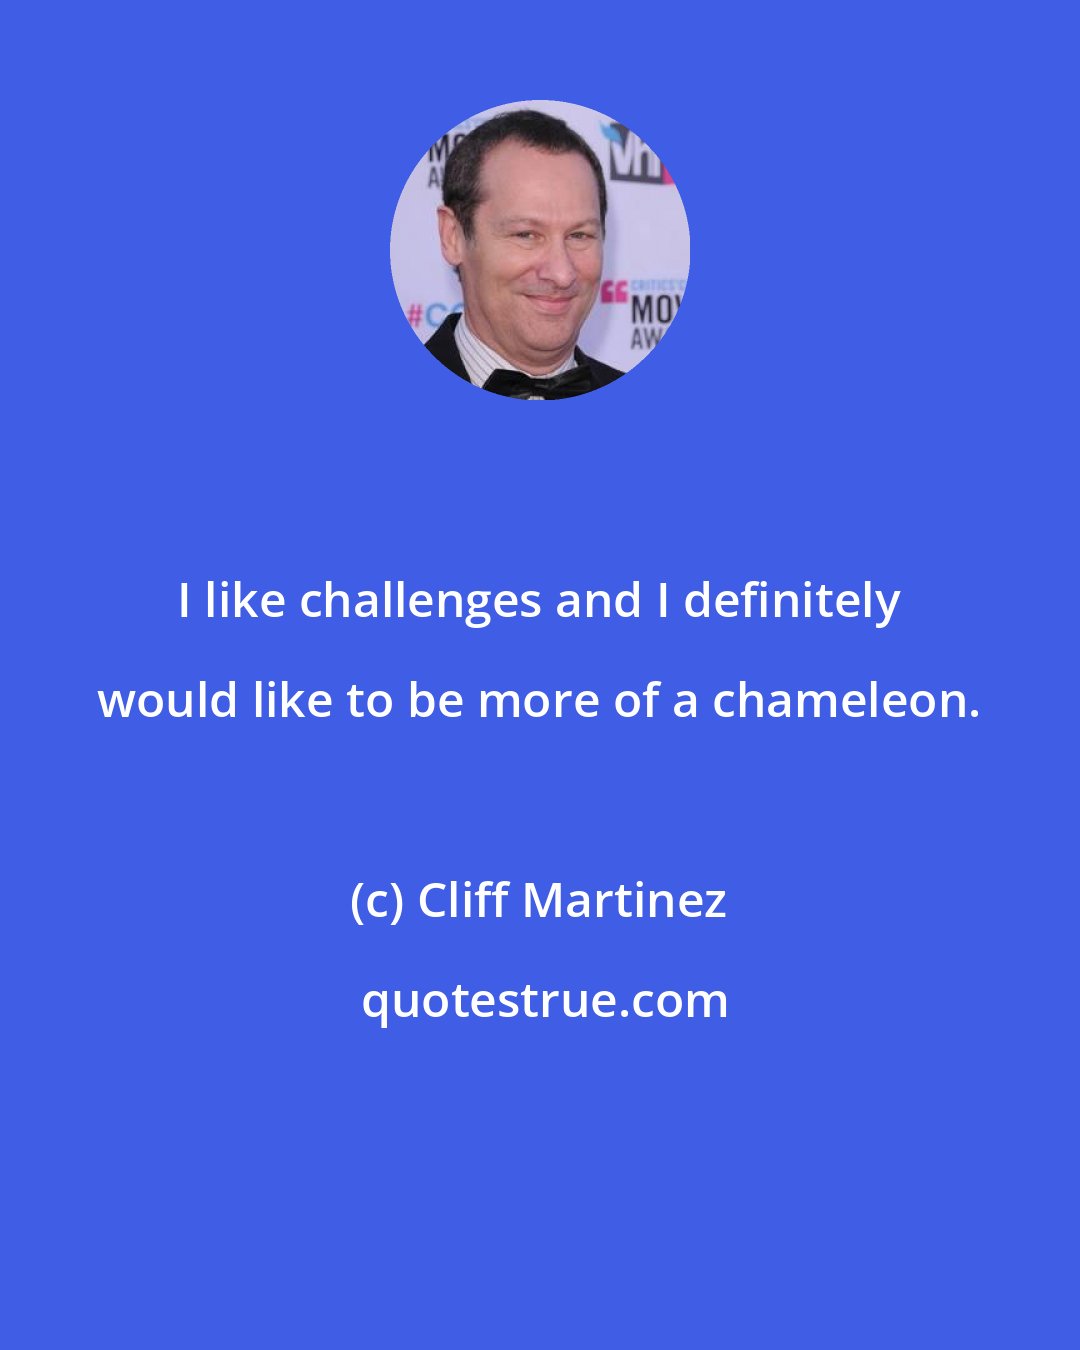 Cliff Martinez: I like challenges and I definitely would like to be more of a chameleon.